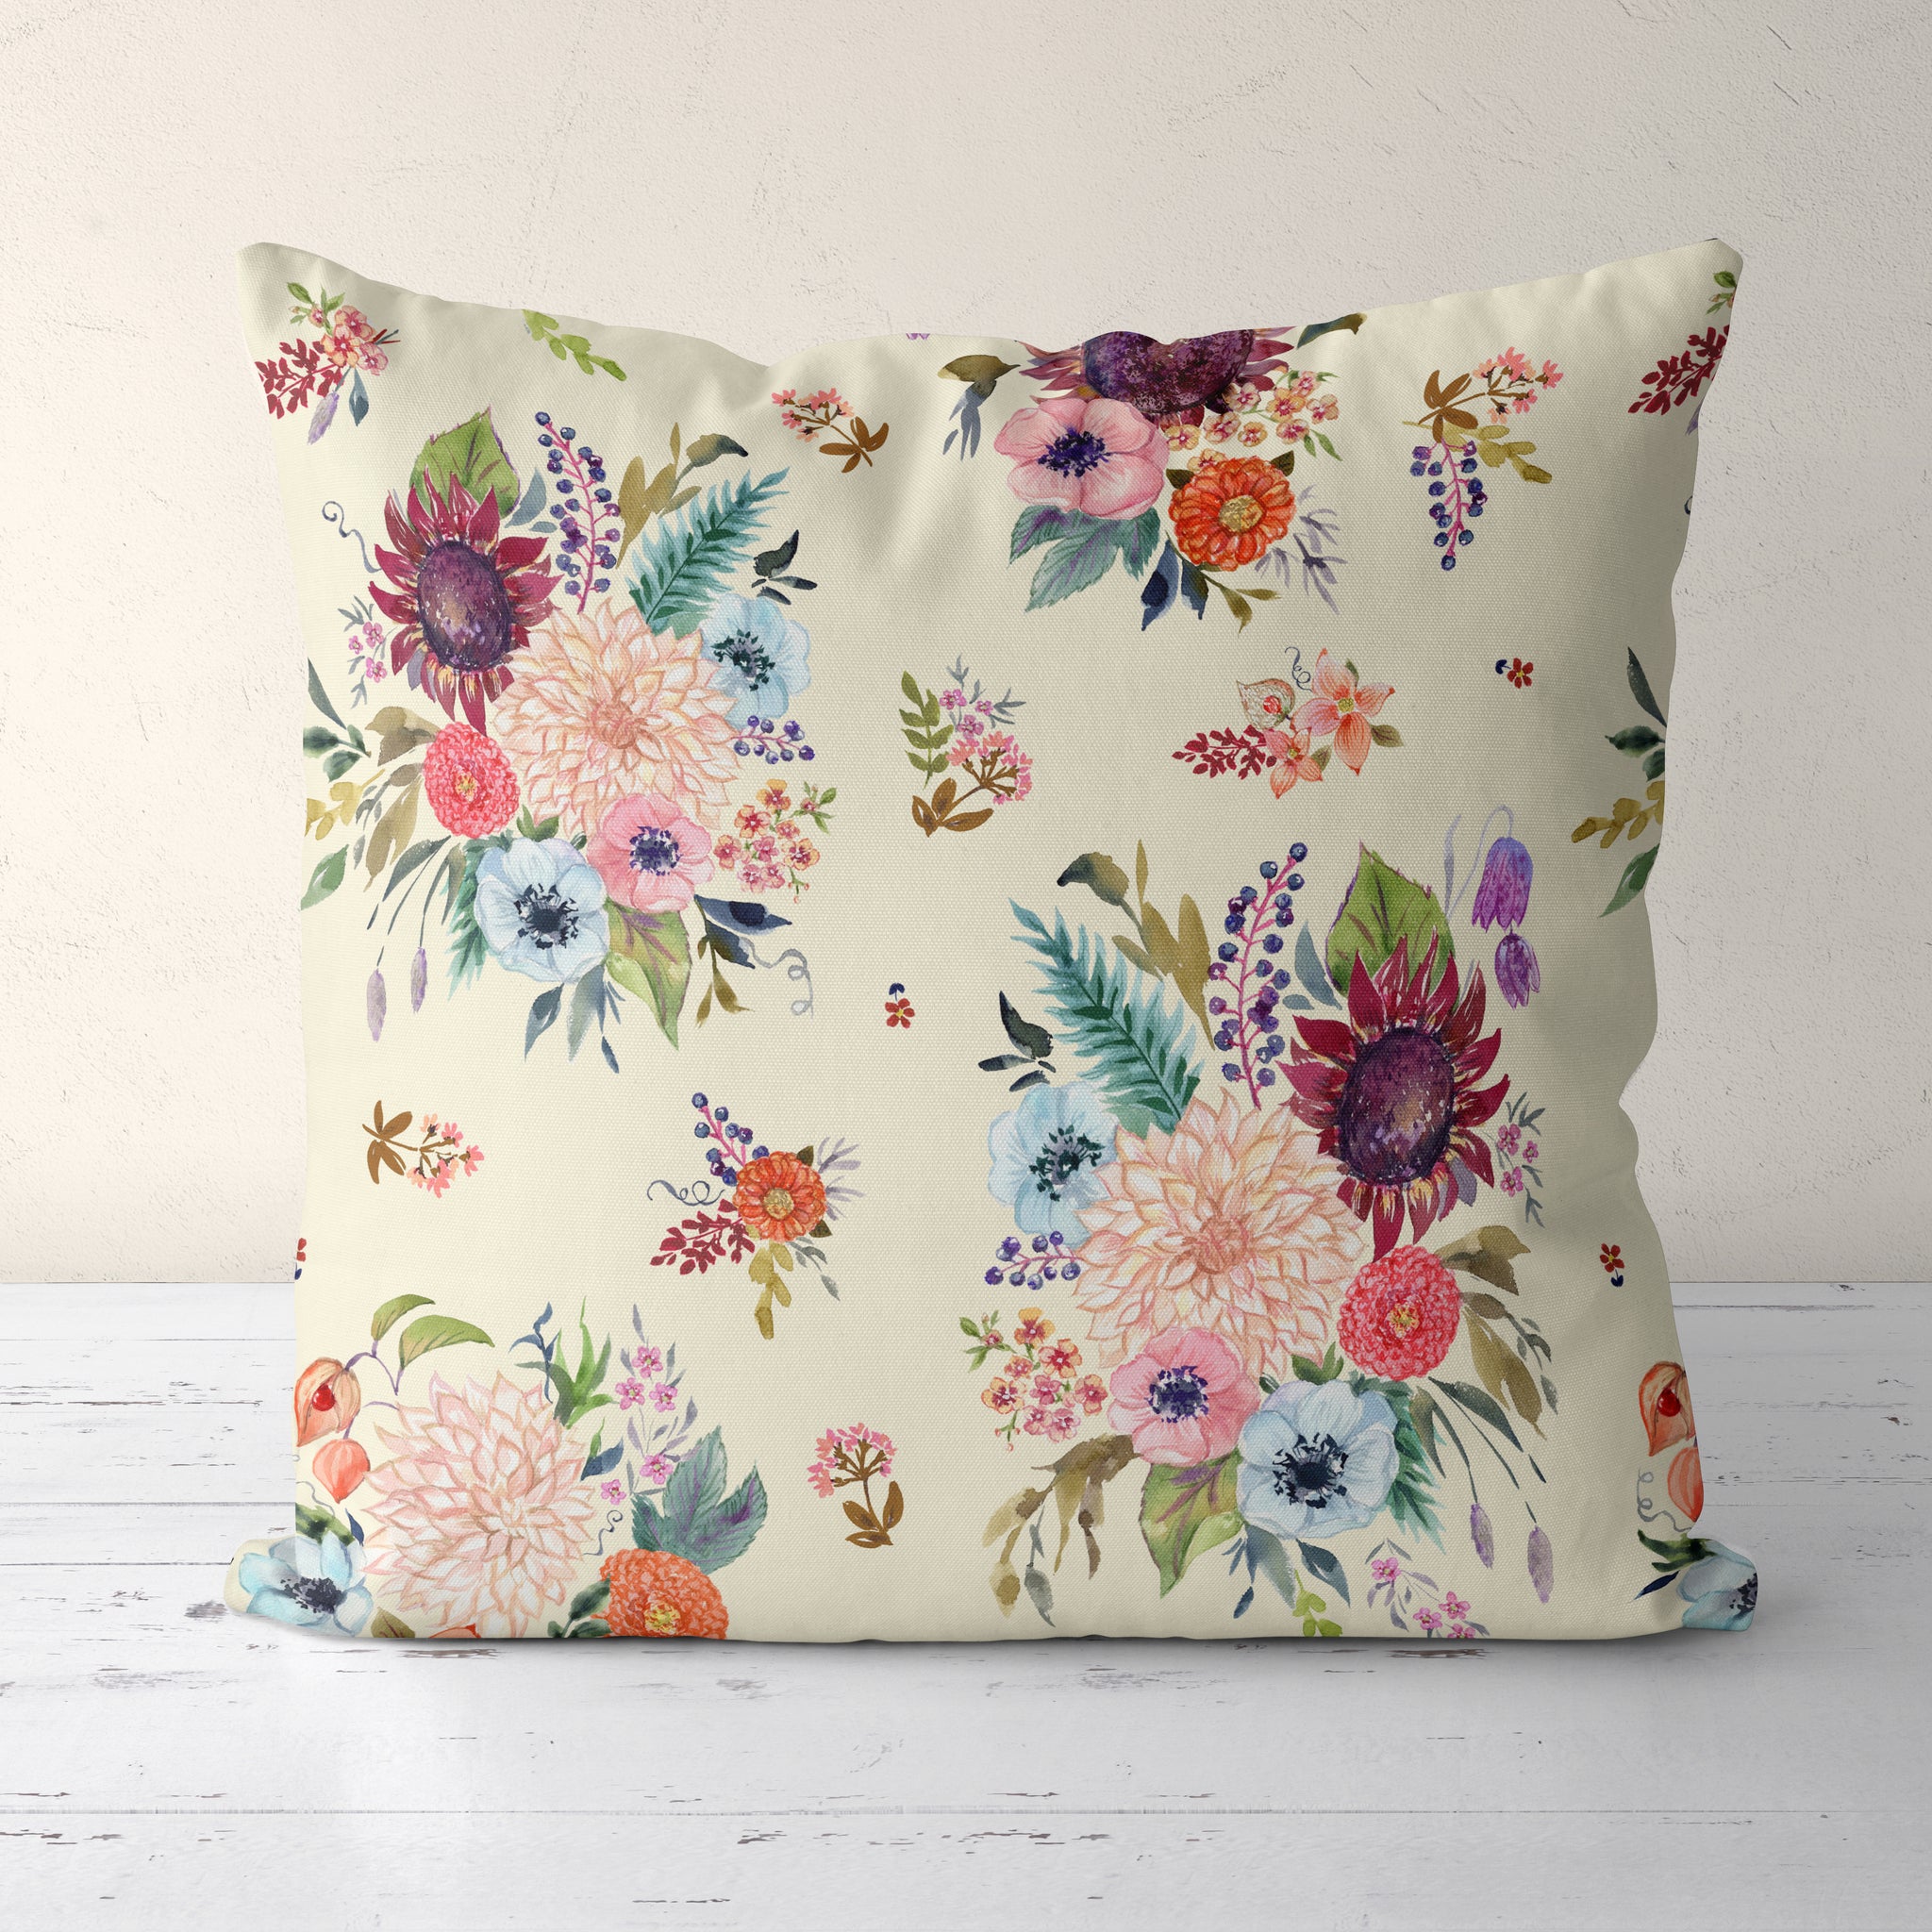 Sophisticated feminine floral pillow by small woman owned business